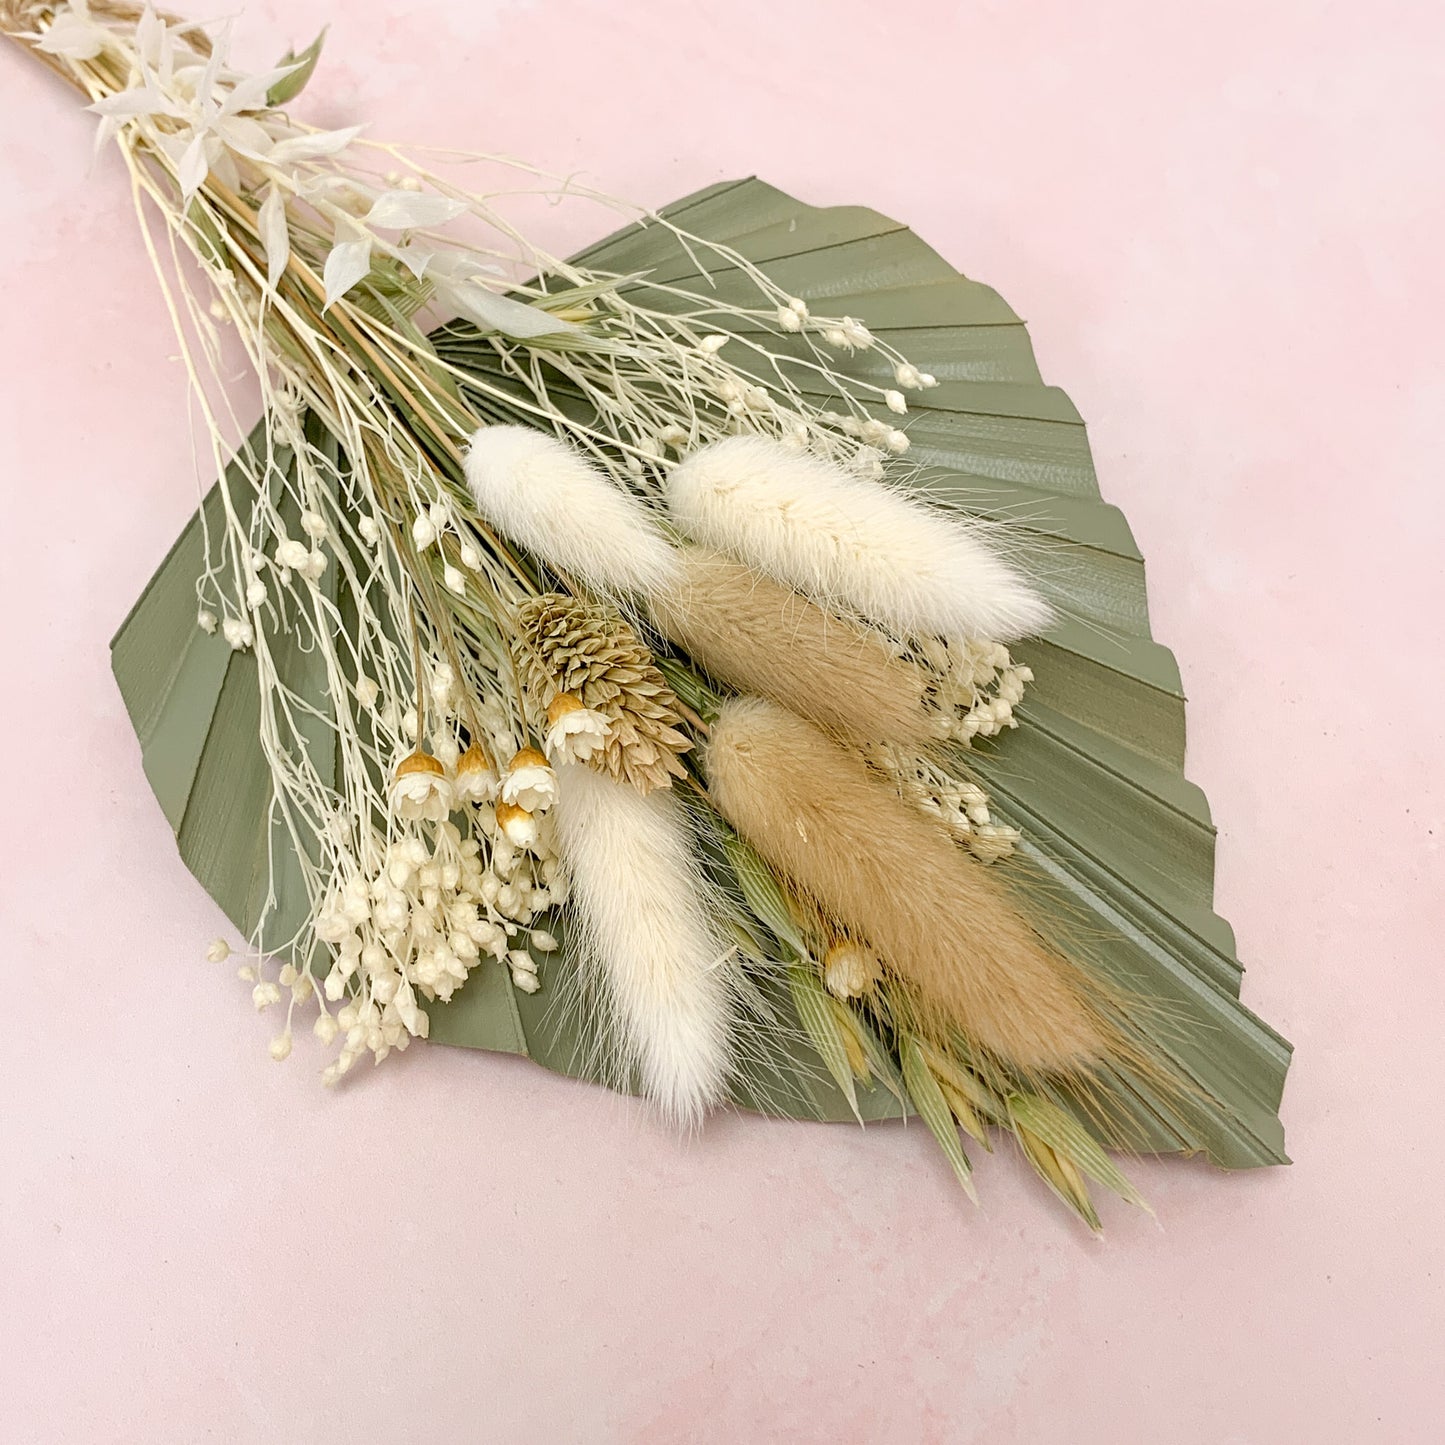 Load image into Gallery viewer, Khaki and natural dried palm spear set
